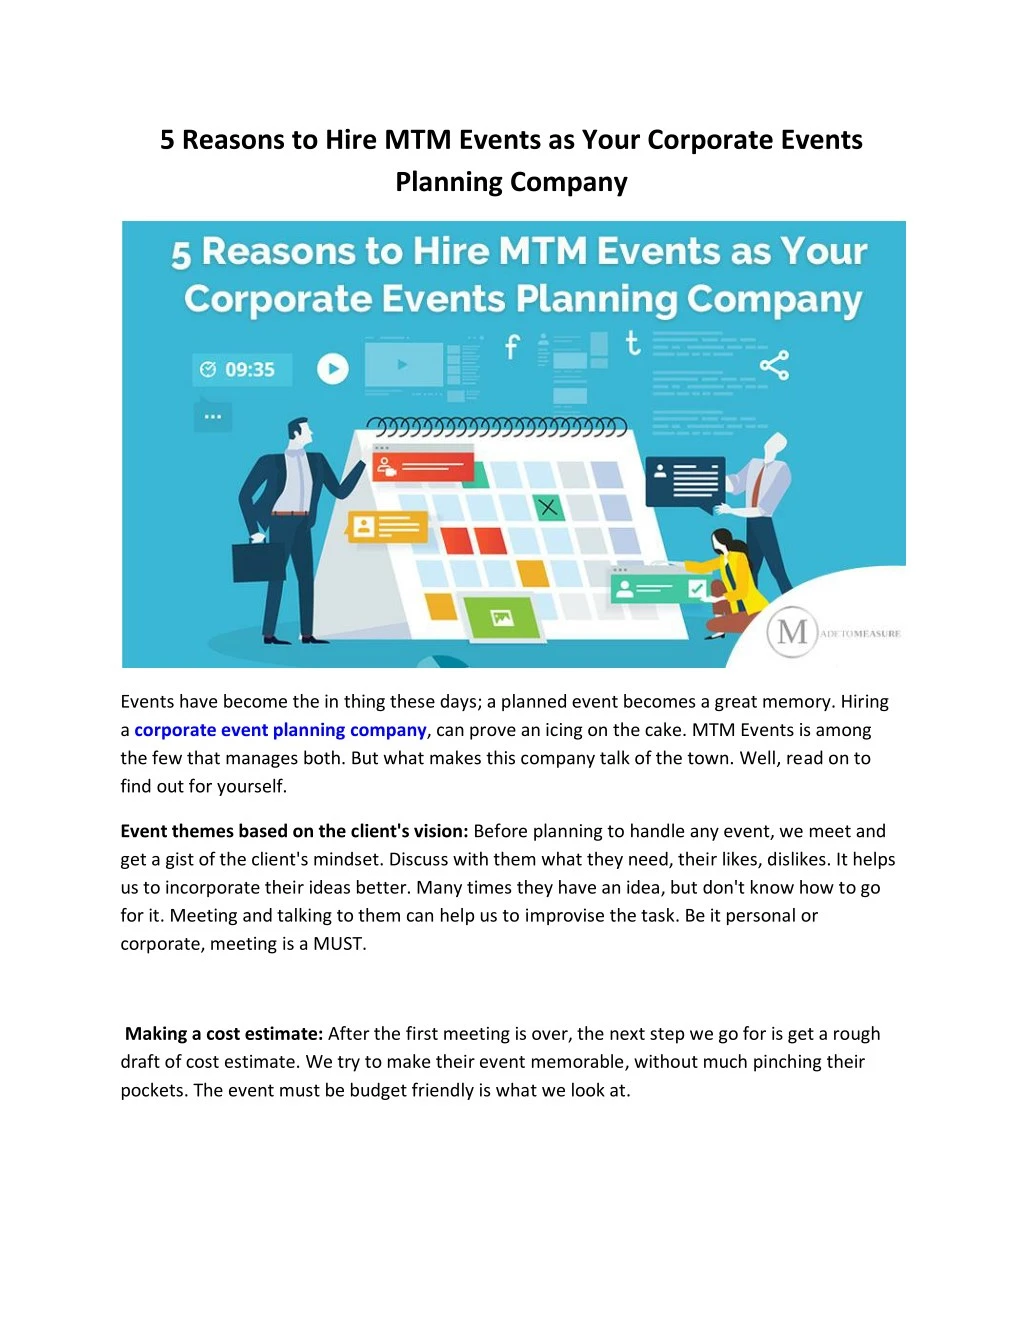 5 reasons to hire mtm events as your corporate